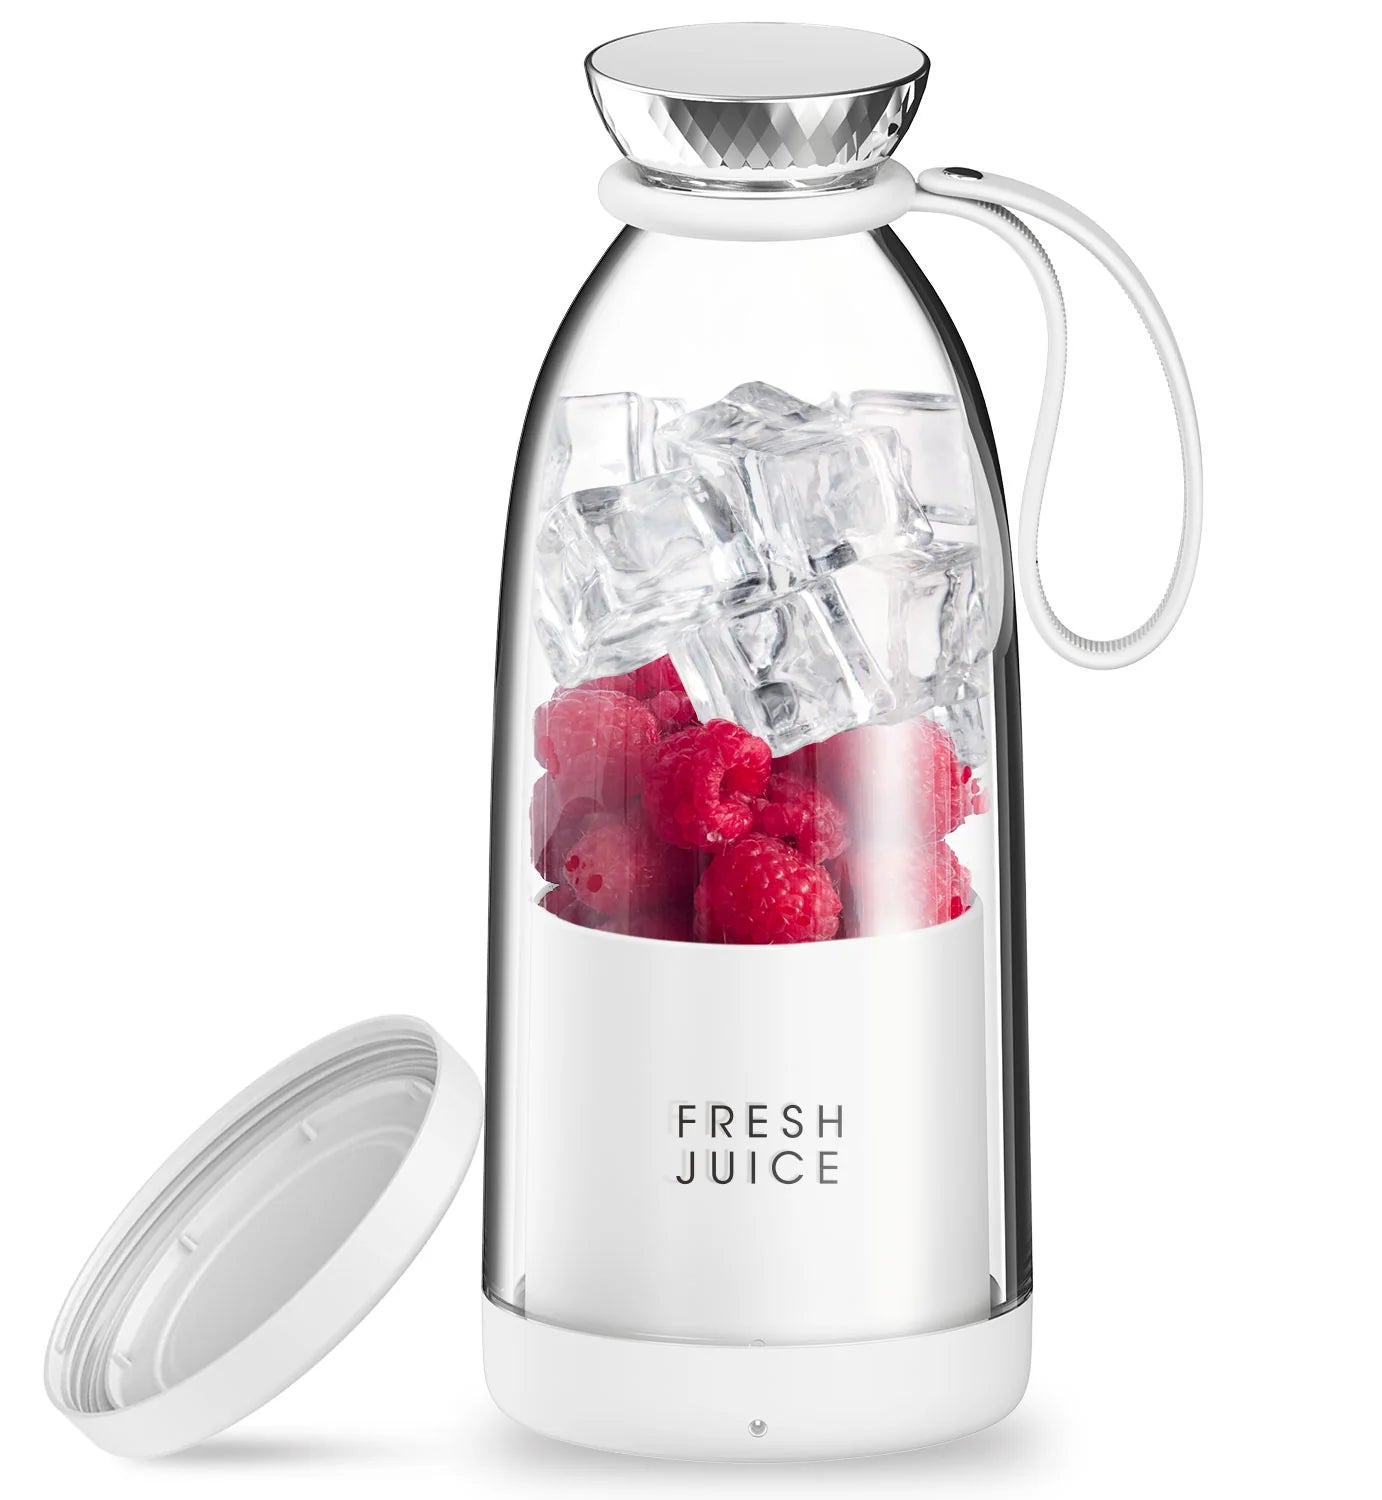 The BEST Portable Blender that makes fresh juice, smoothies, milkshakes, and protein shakes.